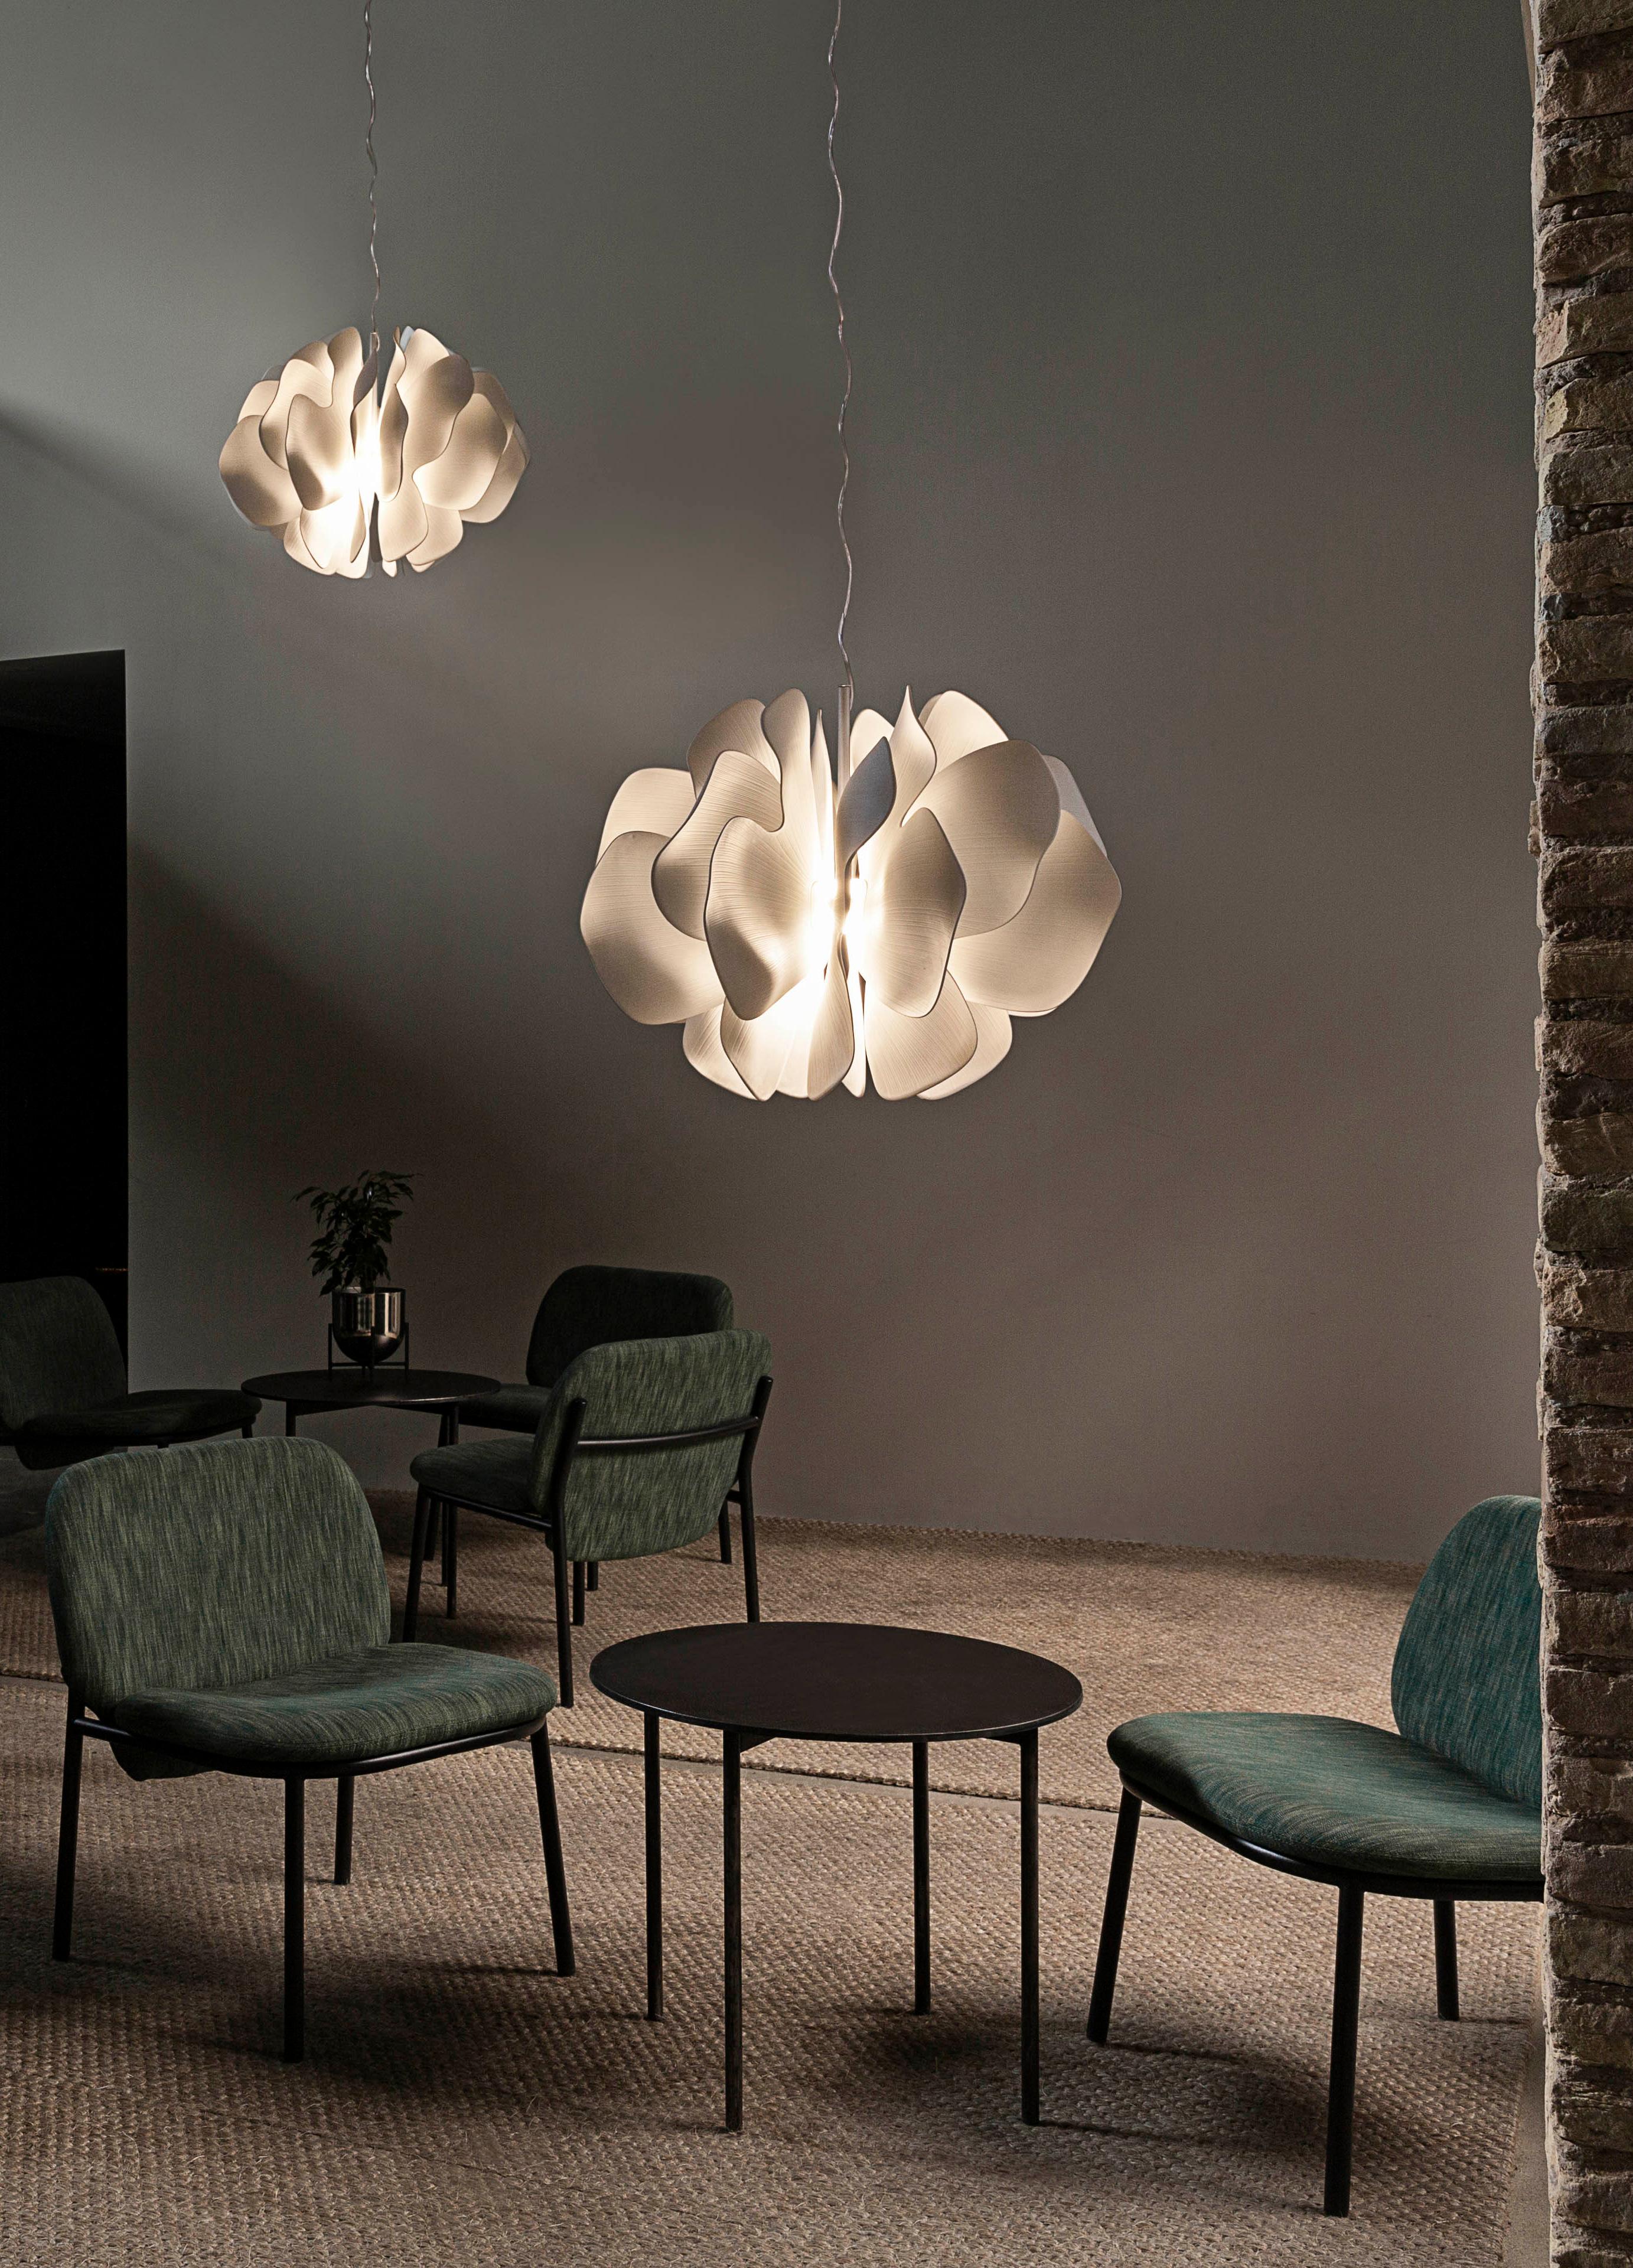 Porcelain hanging lamp with a spectacular design inspired by the petals of a flower delicately swaying in the breeze. This work is part of the lighting collection created by Marcel Wanders in partnership with Lladró. A novel, contemporary design